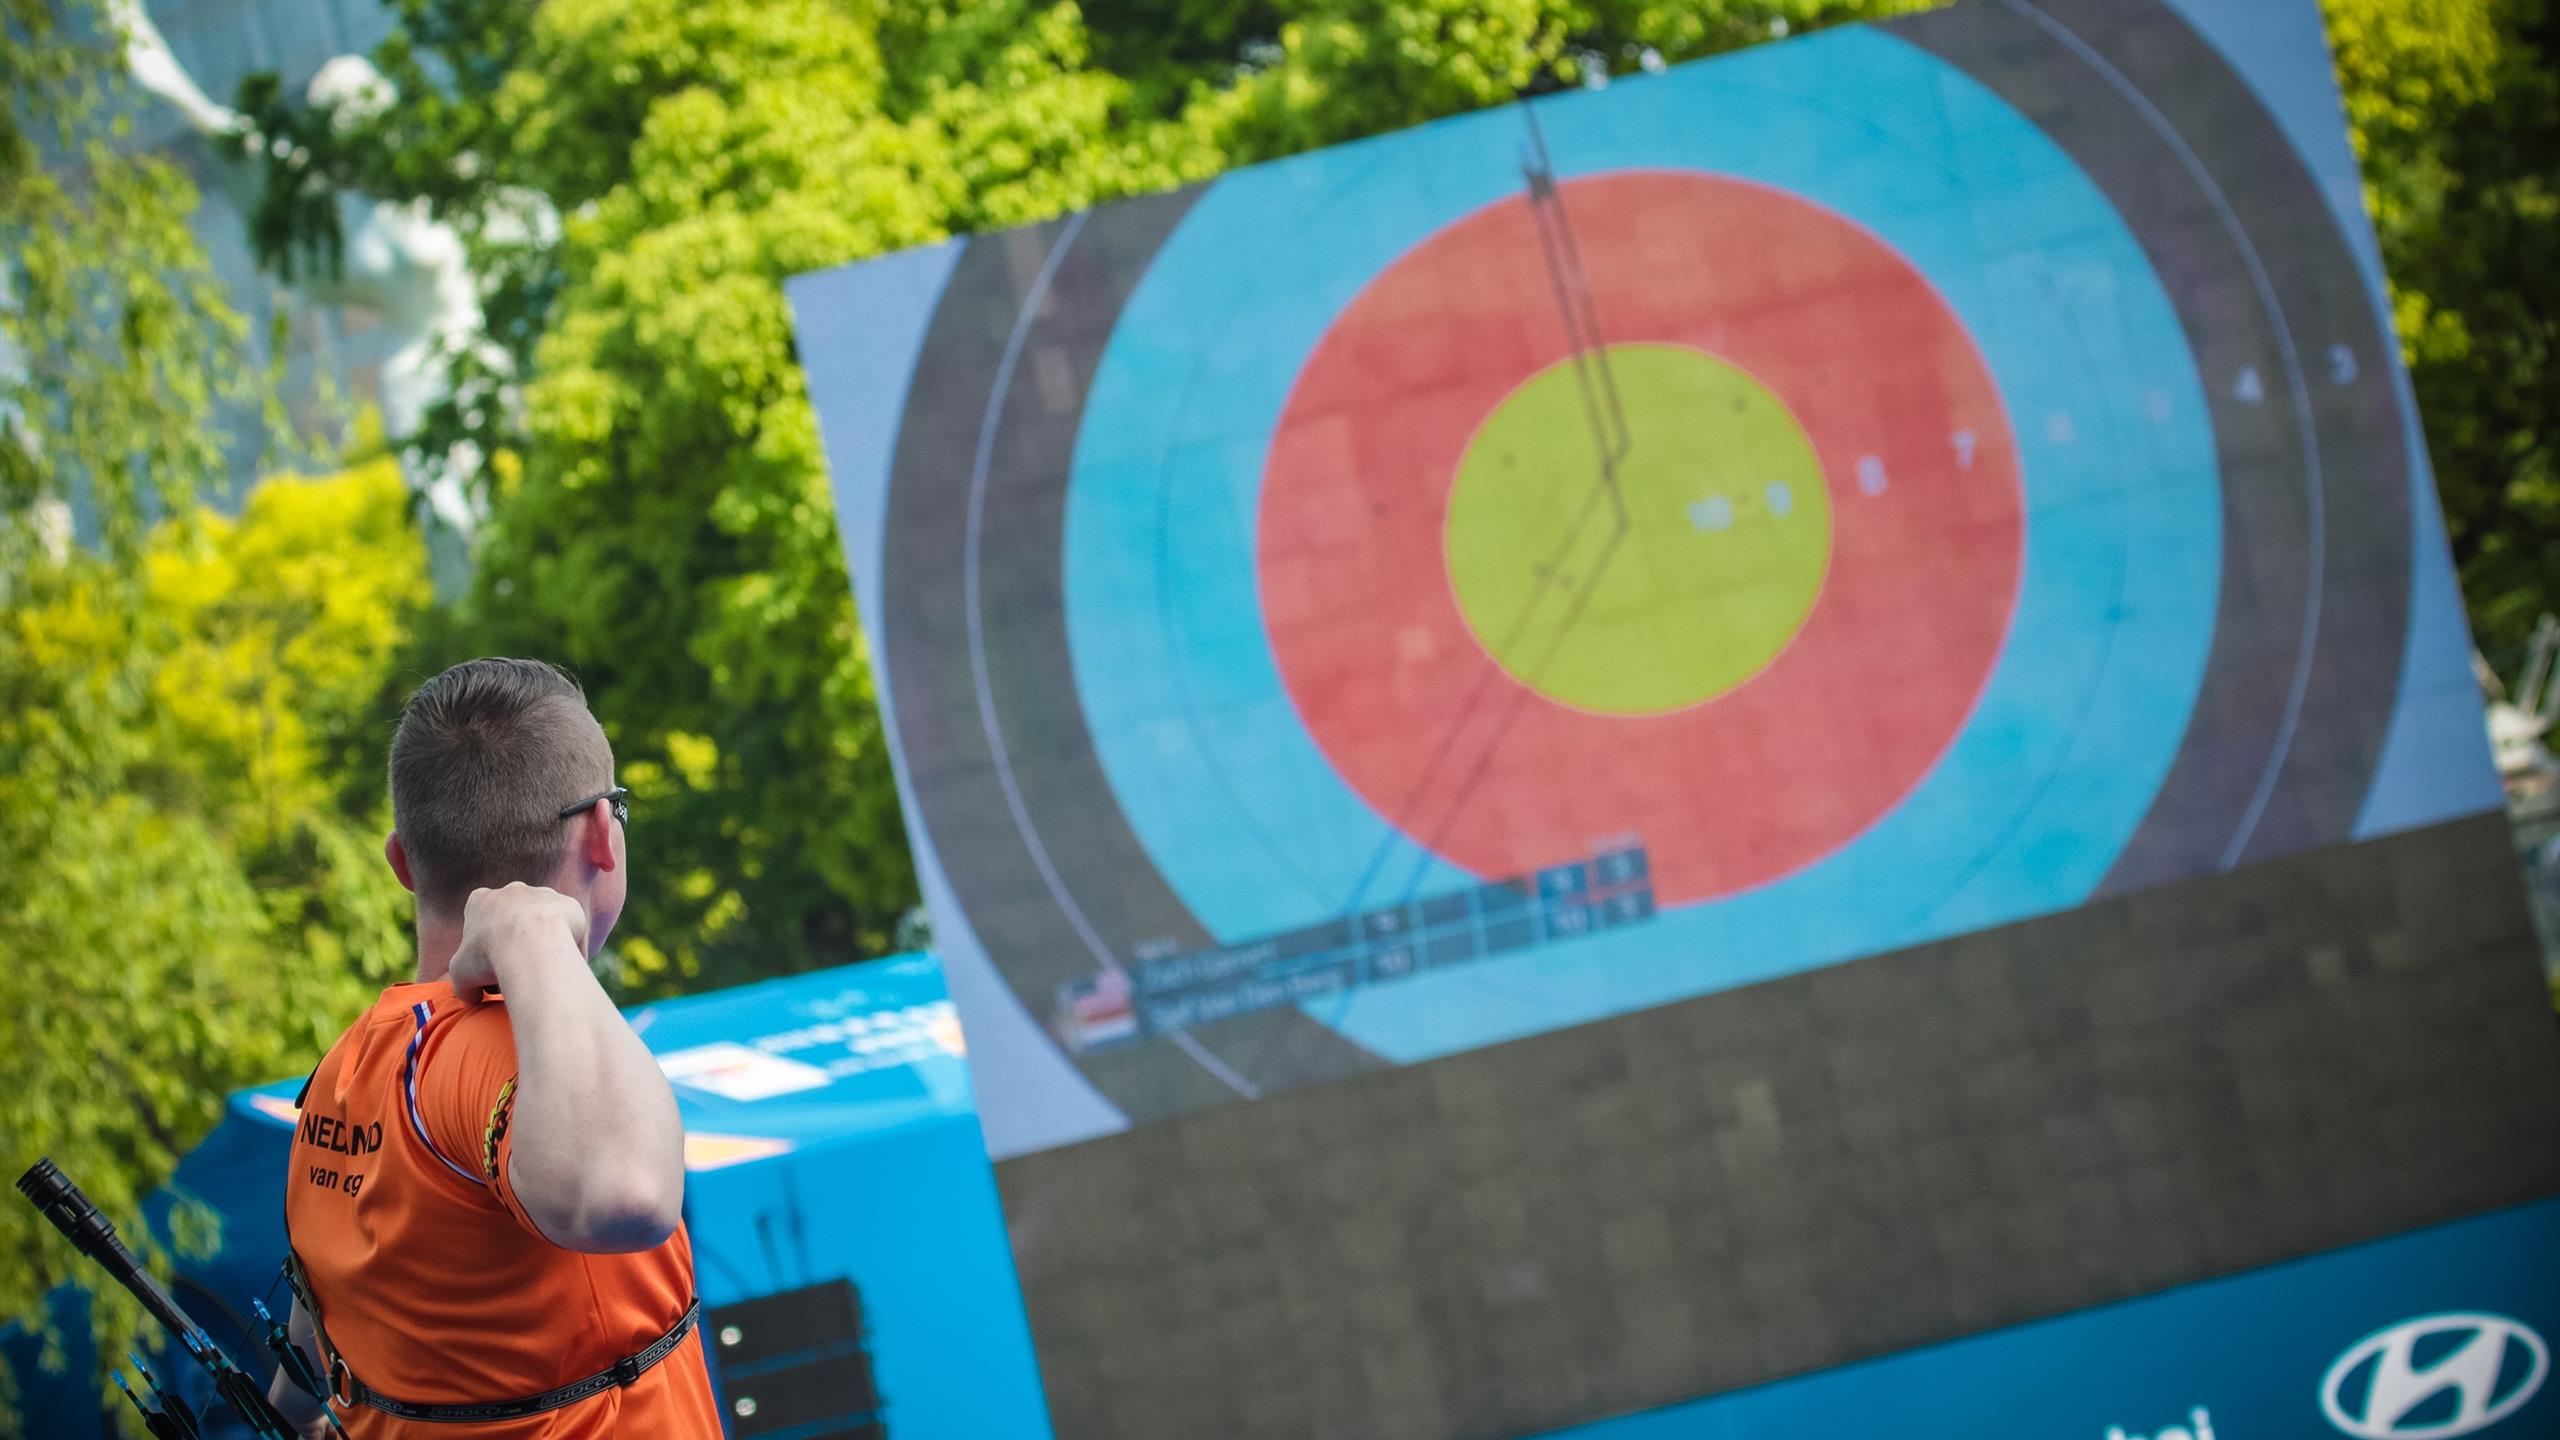 Tokyo Olympics 2020 |  Sjef van den Berg wants to end his career with a medal in shooting